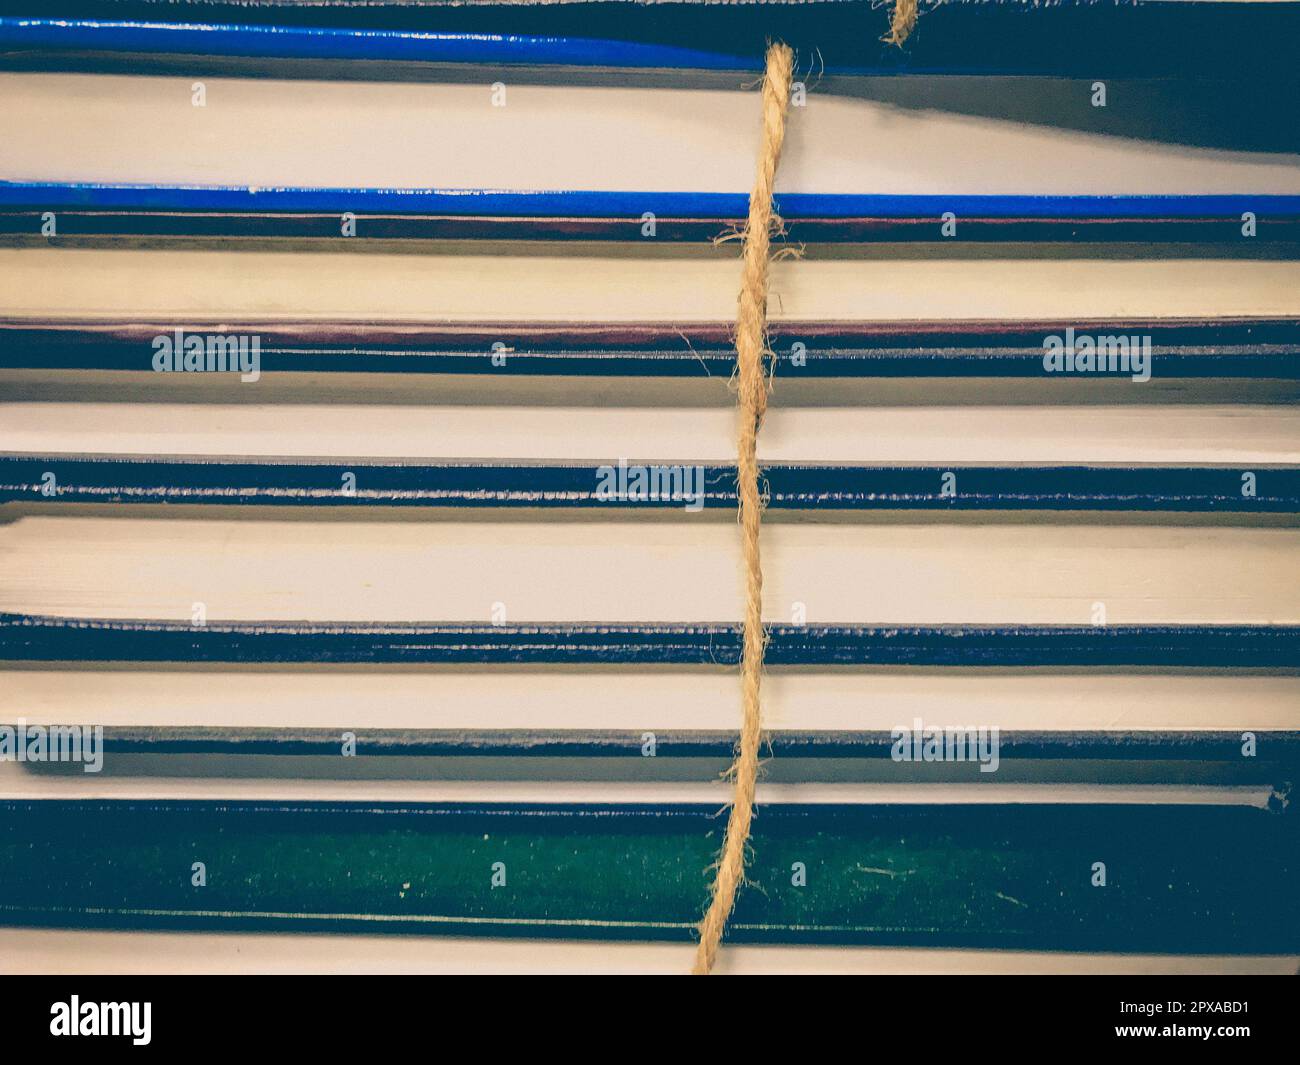 Pile of old books with rope background Stock Photo